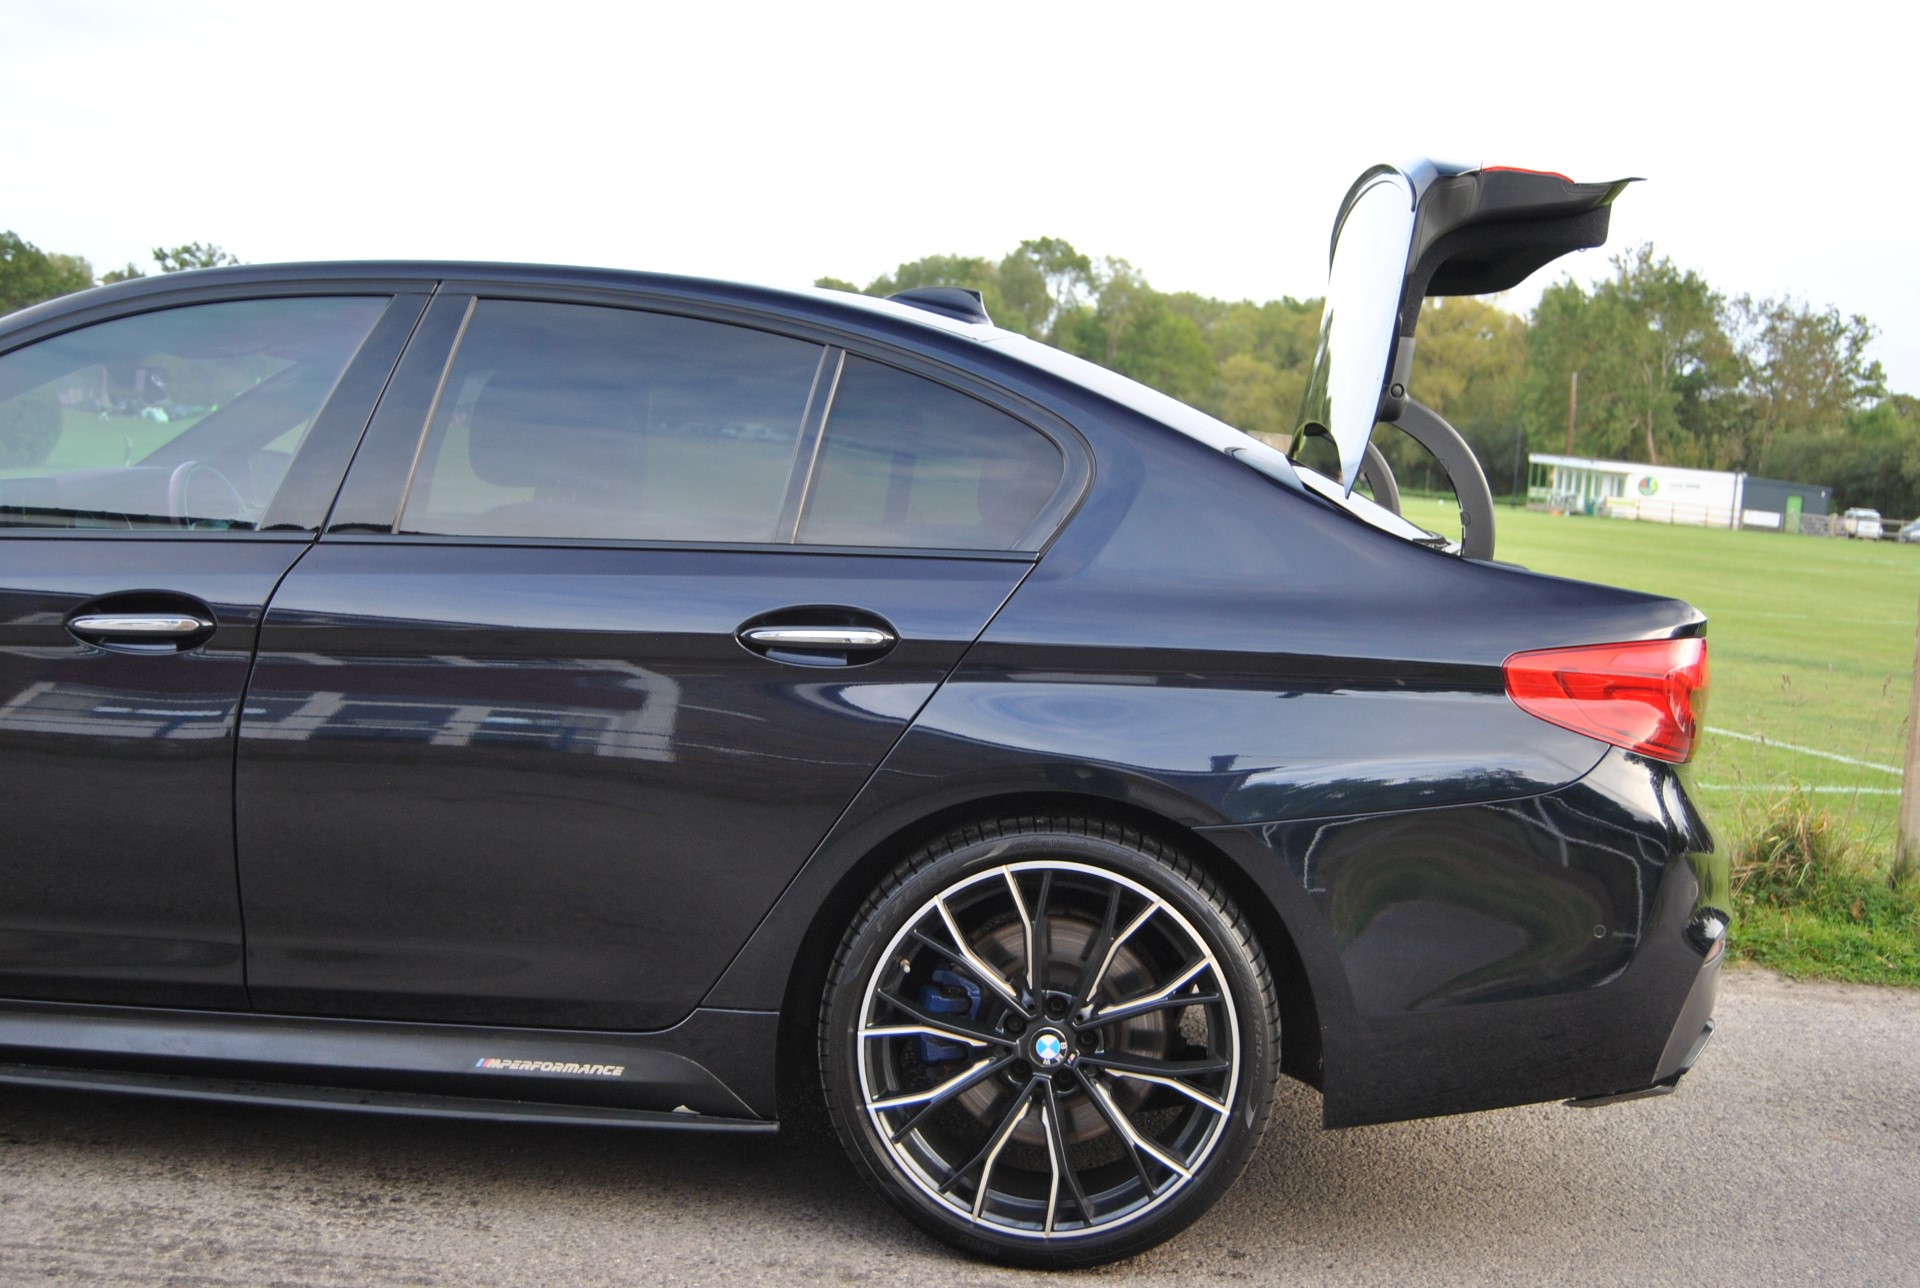 Used BMW M5 for sale in Nr Horsham, West Sussex